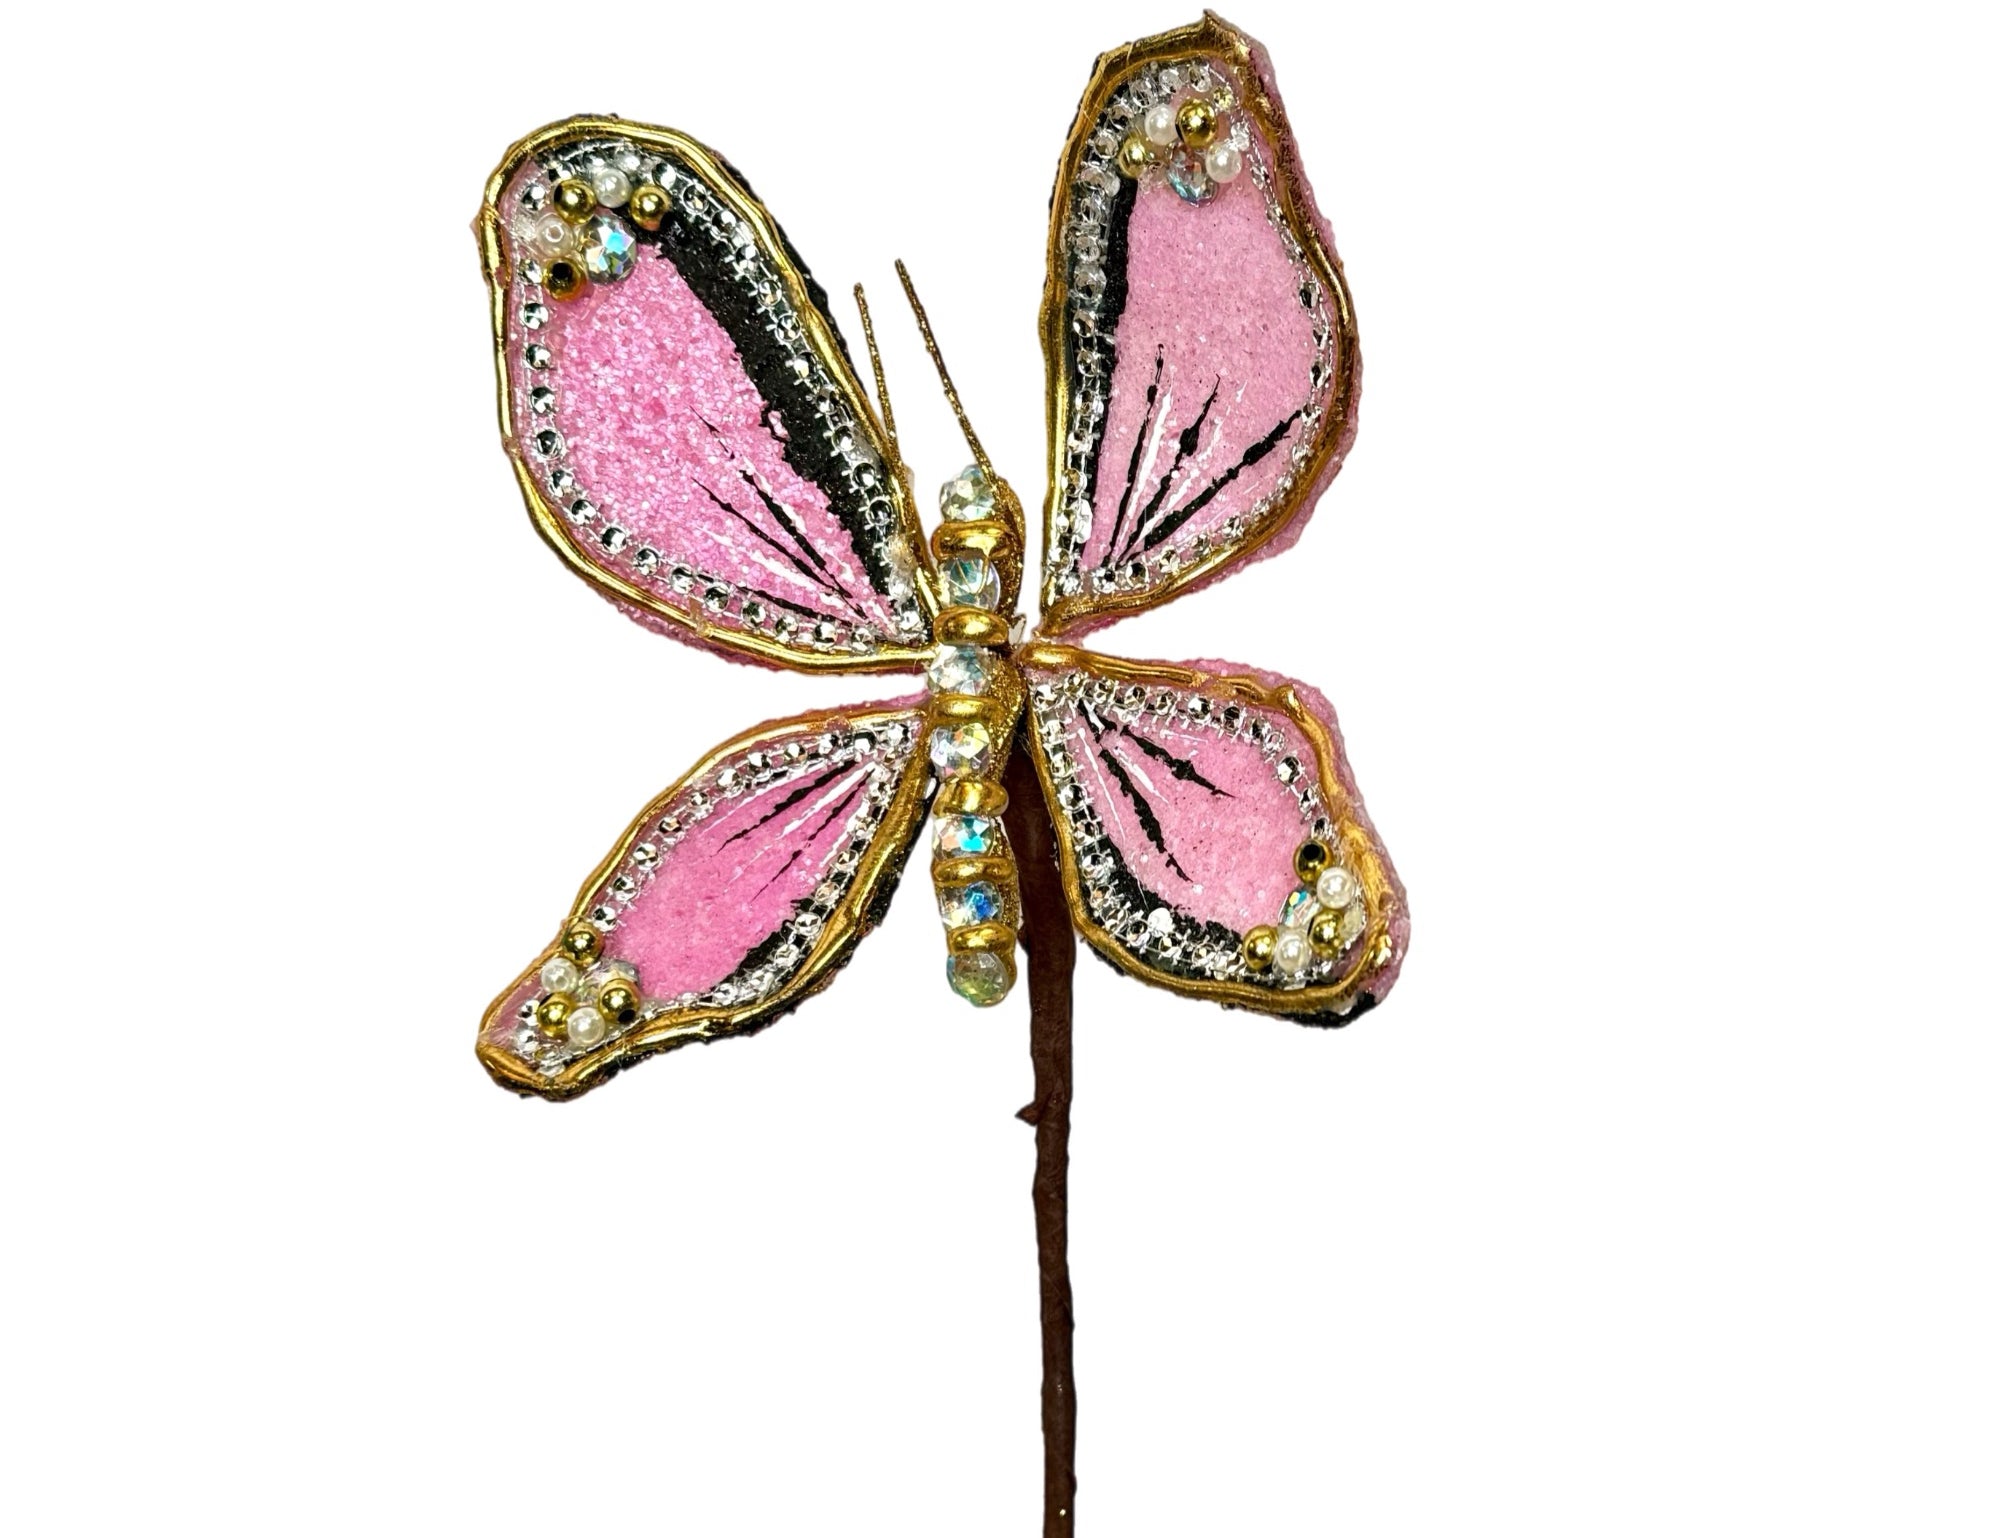 Jeweled Butterly Stem -Large